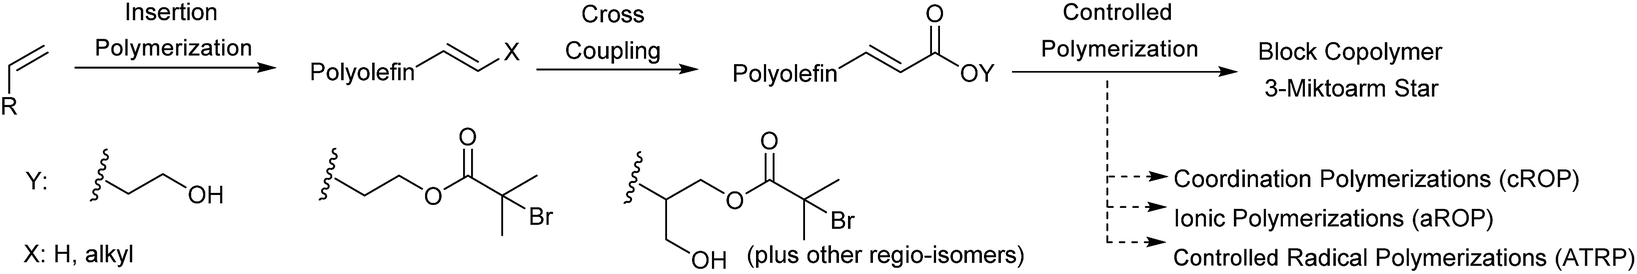 Polyolefin Chemical Resistance Chart